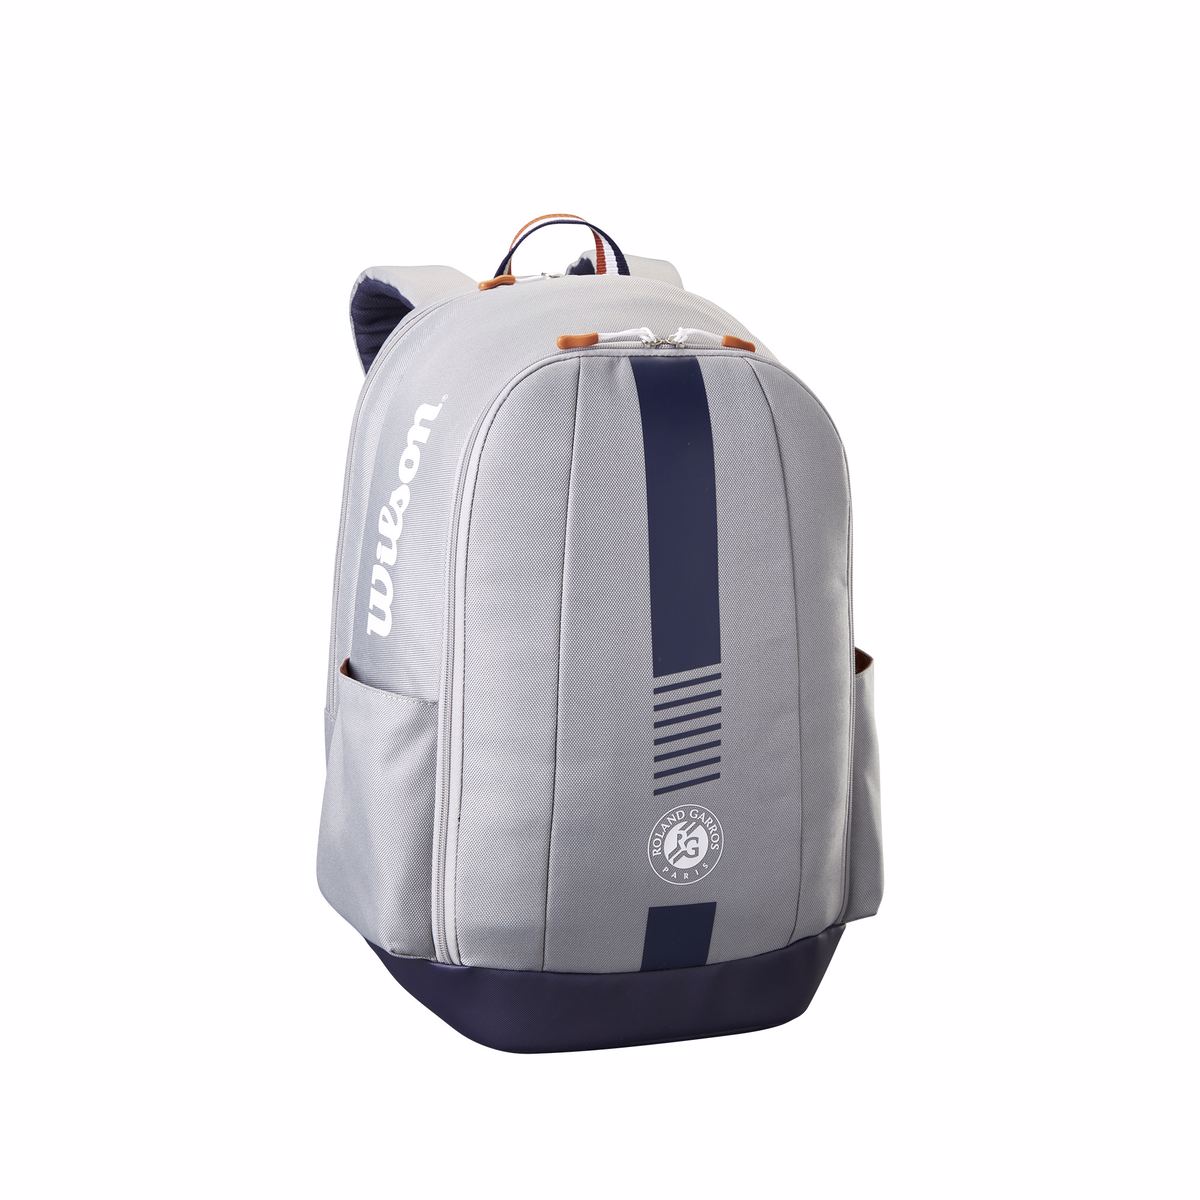 WR8019301_0_Roland_Garros_Team_Backpack_GY.png.high-res_1200x1200